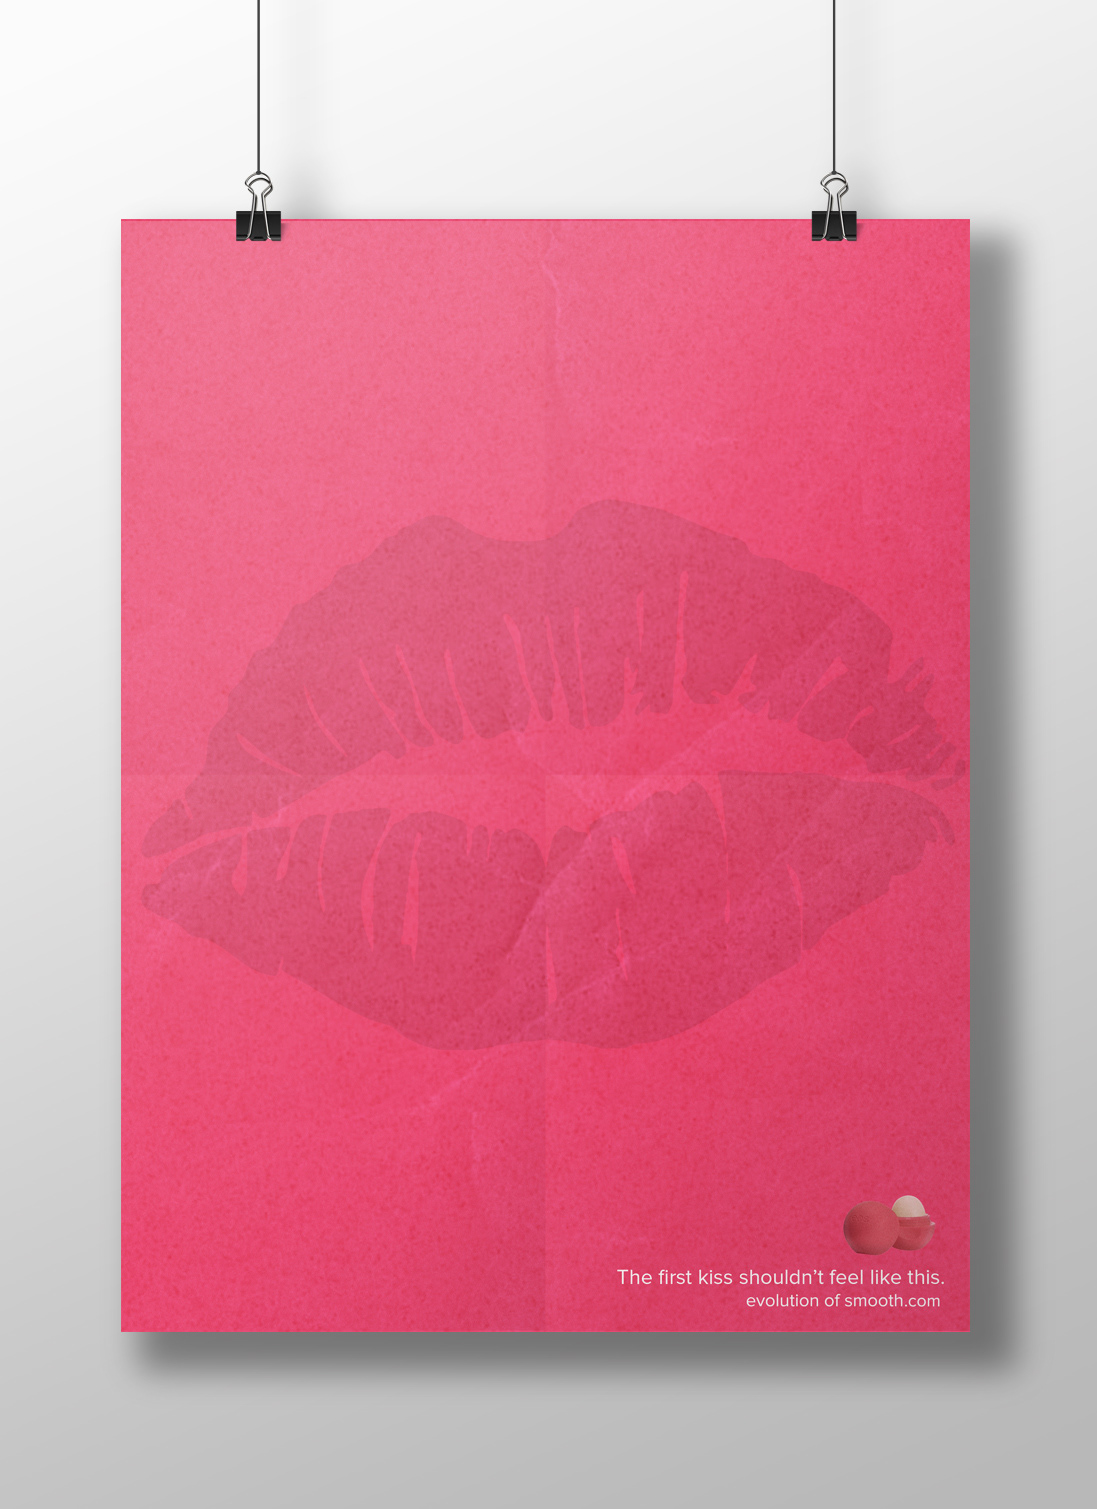 eos lip balm health and beauty ad Ambient print evolution of smooth smooth evolution